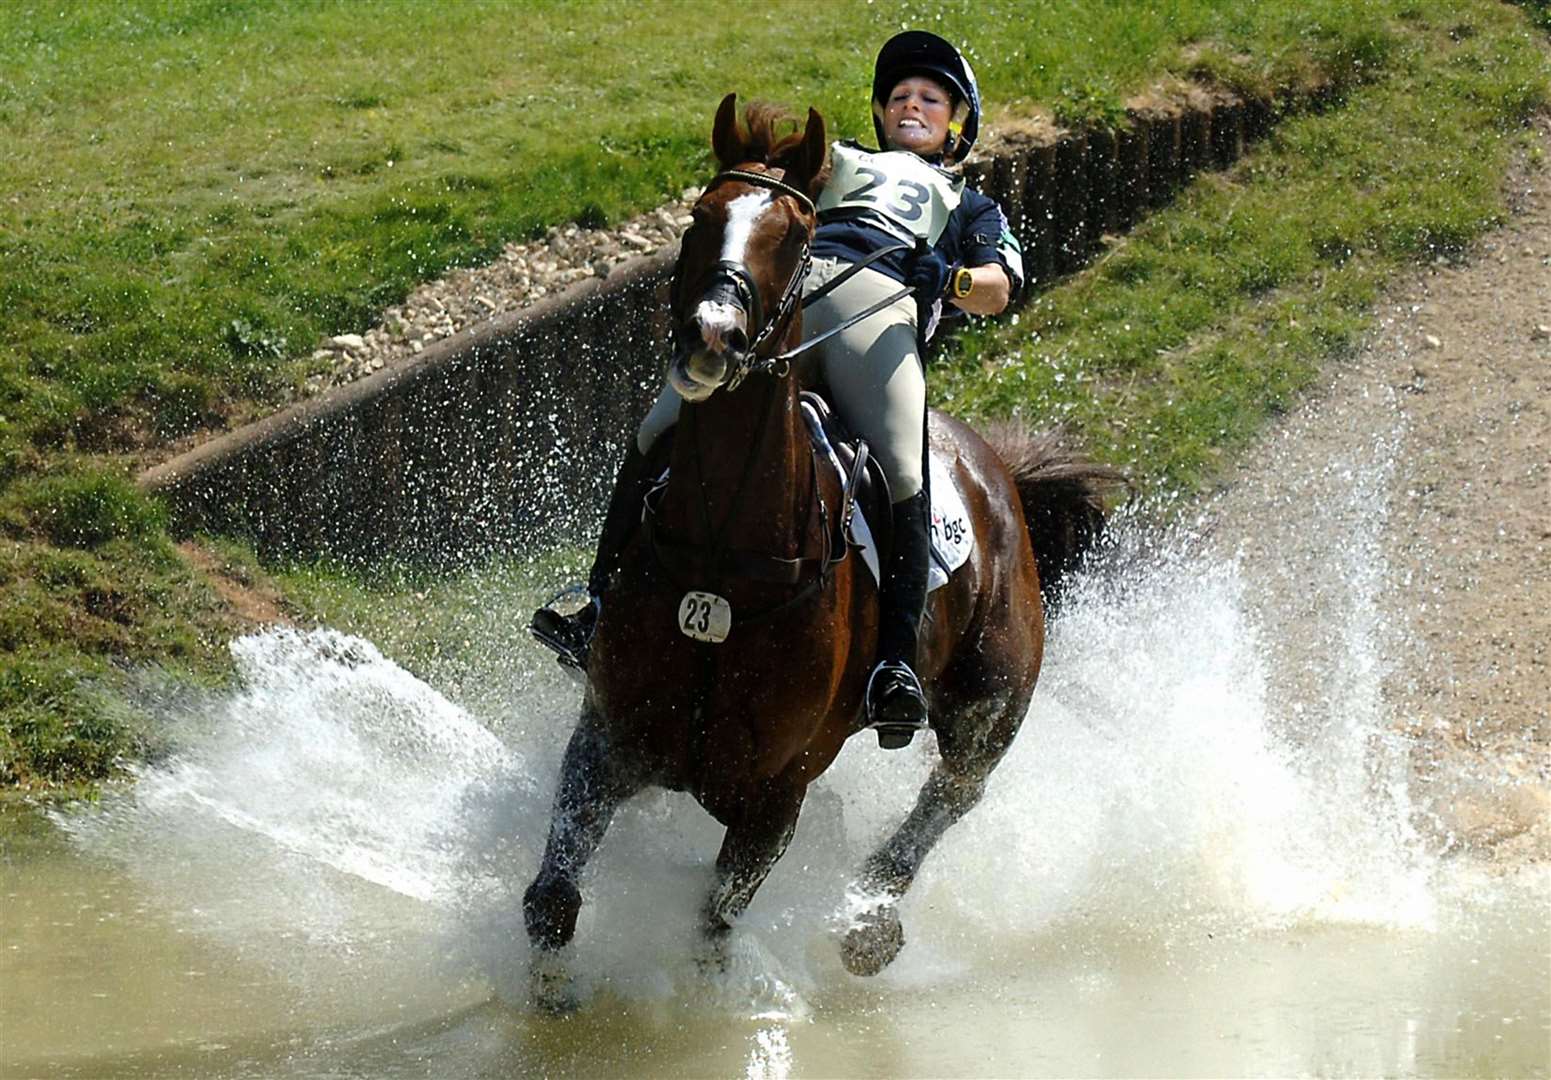 Zara on Ardfield Magic Star at the Bramham International Horse Trials in 2006, two years after she was knocked unconscious after falling from the same horse (John Giles/PA)